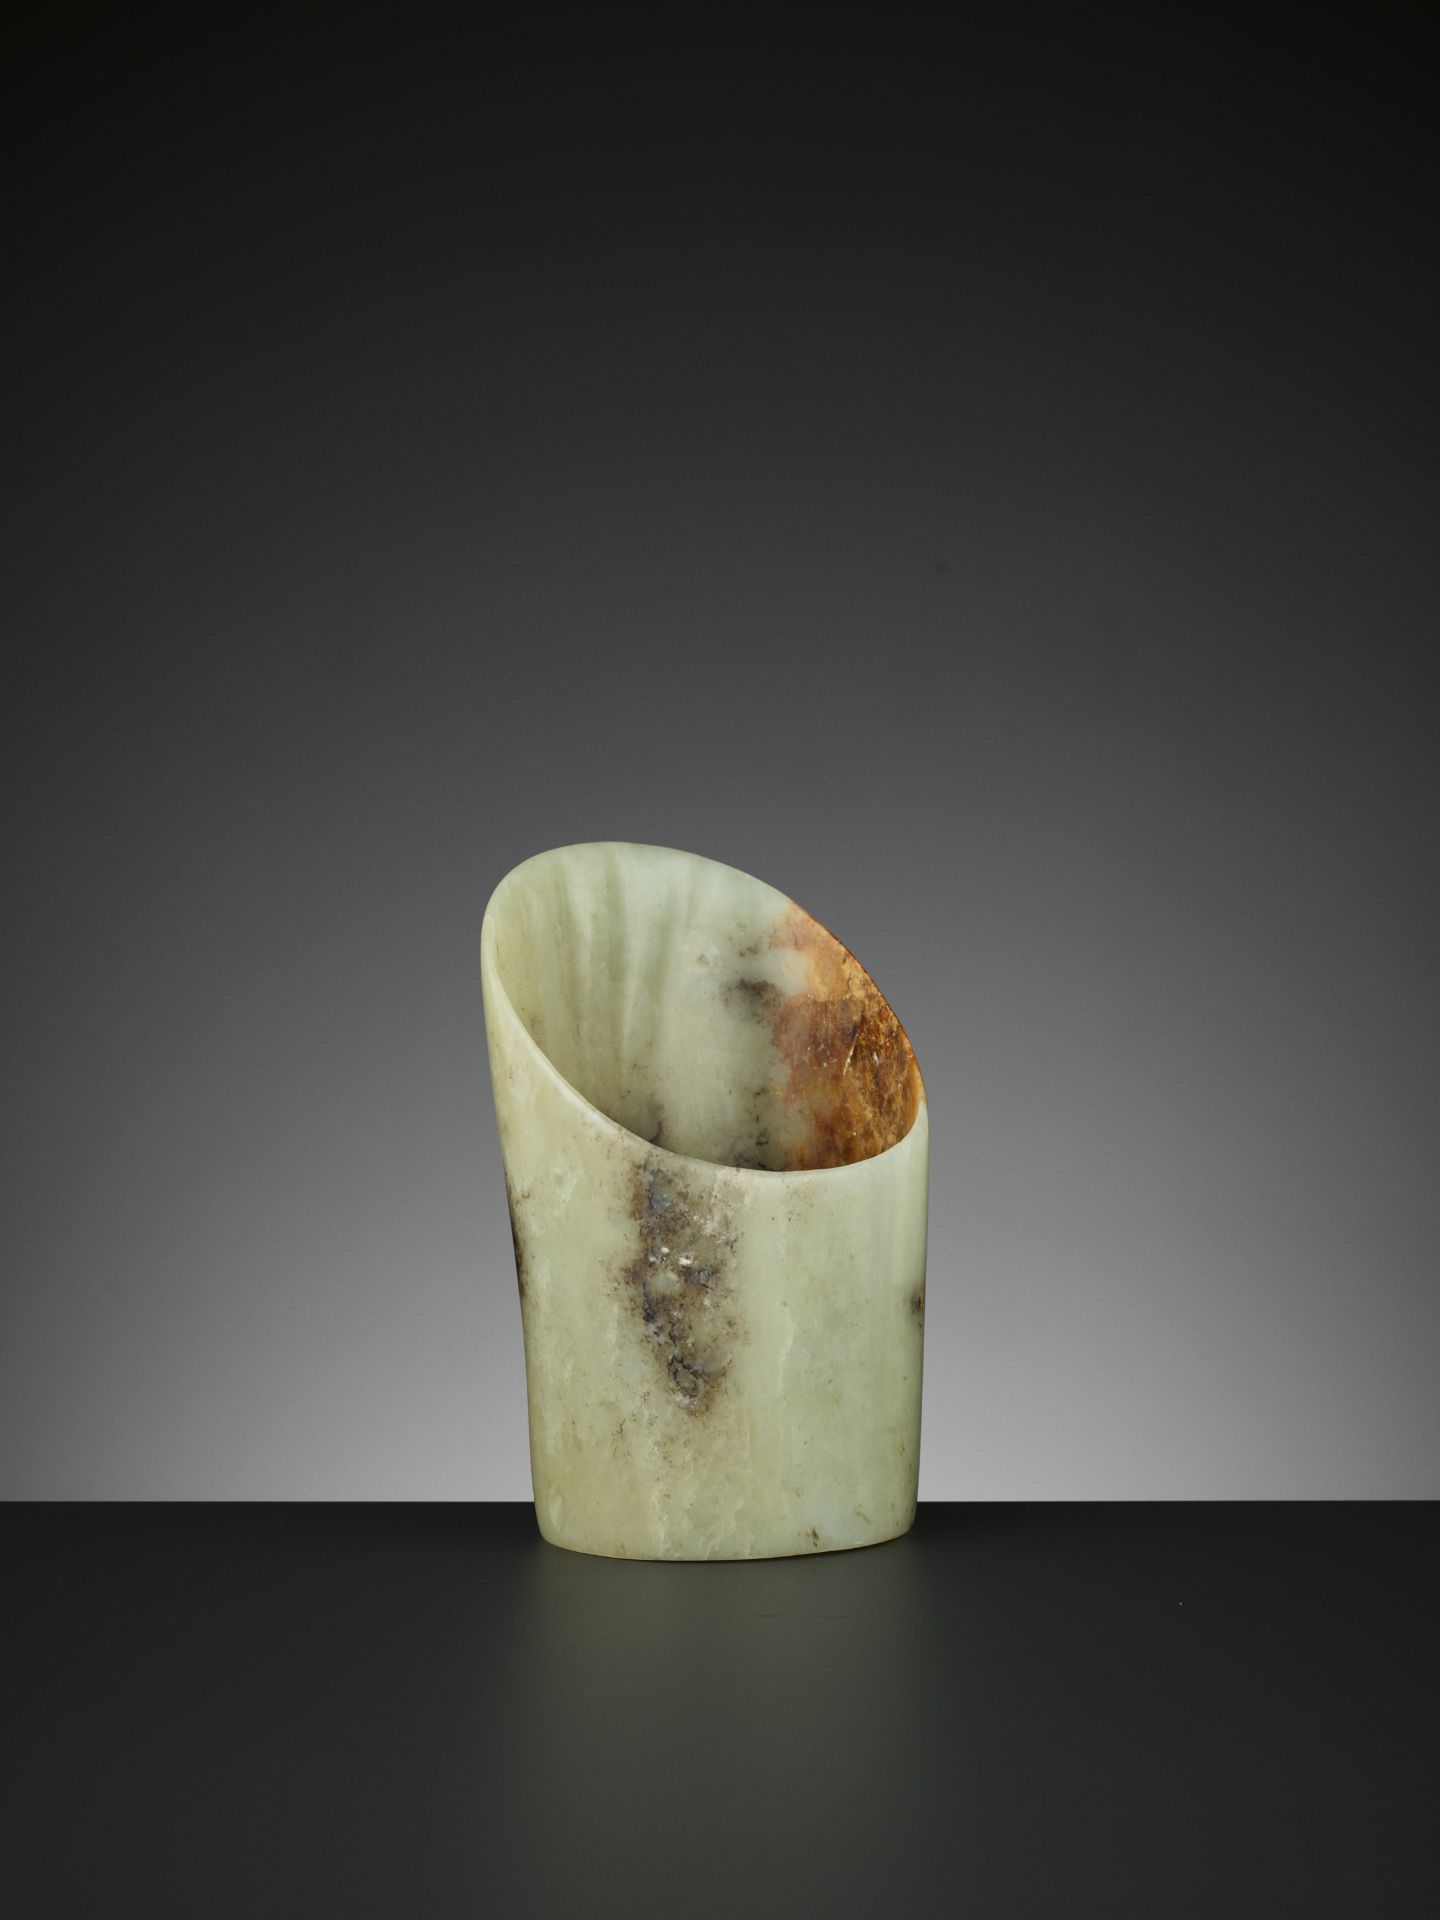 A PALE YELLOW AND RUSSET JADE HOOF-SHAPED ORNAMENT, HONGSHAN - Image 9 of 13